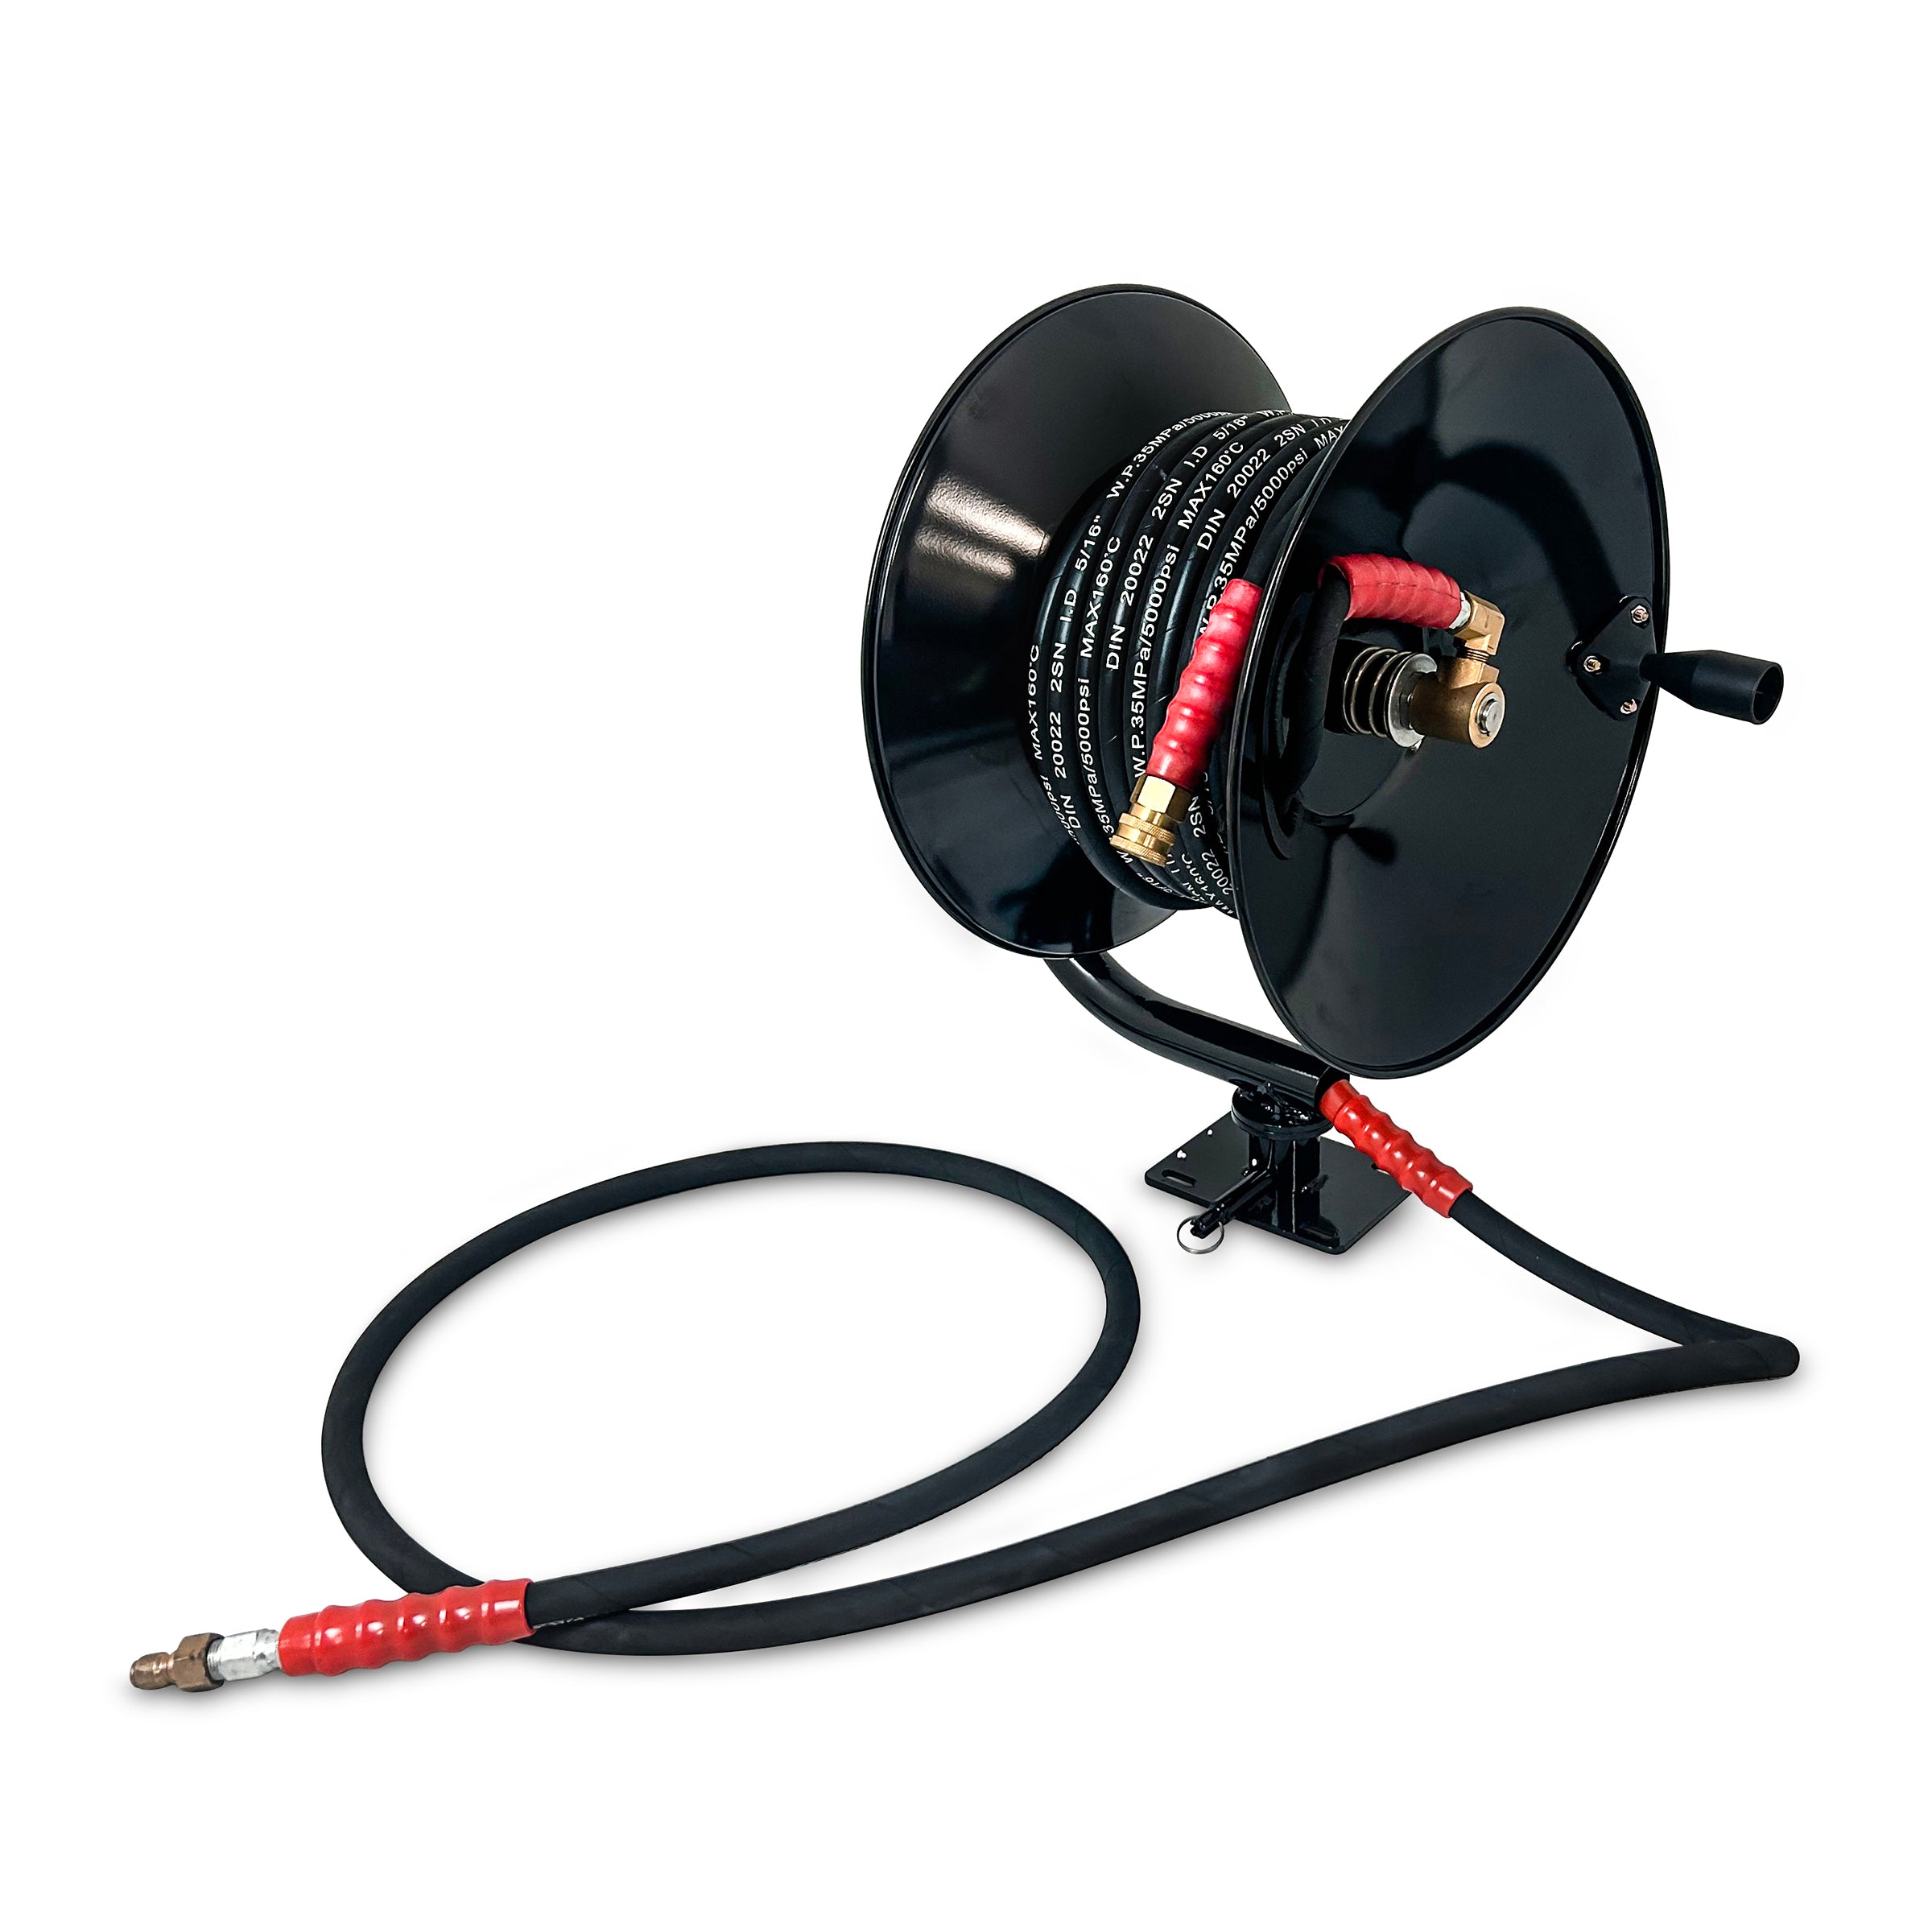 Erie Tools 5100 PSI 3/8 x 100' Pressure Washer Hose Reel with